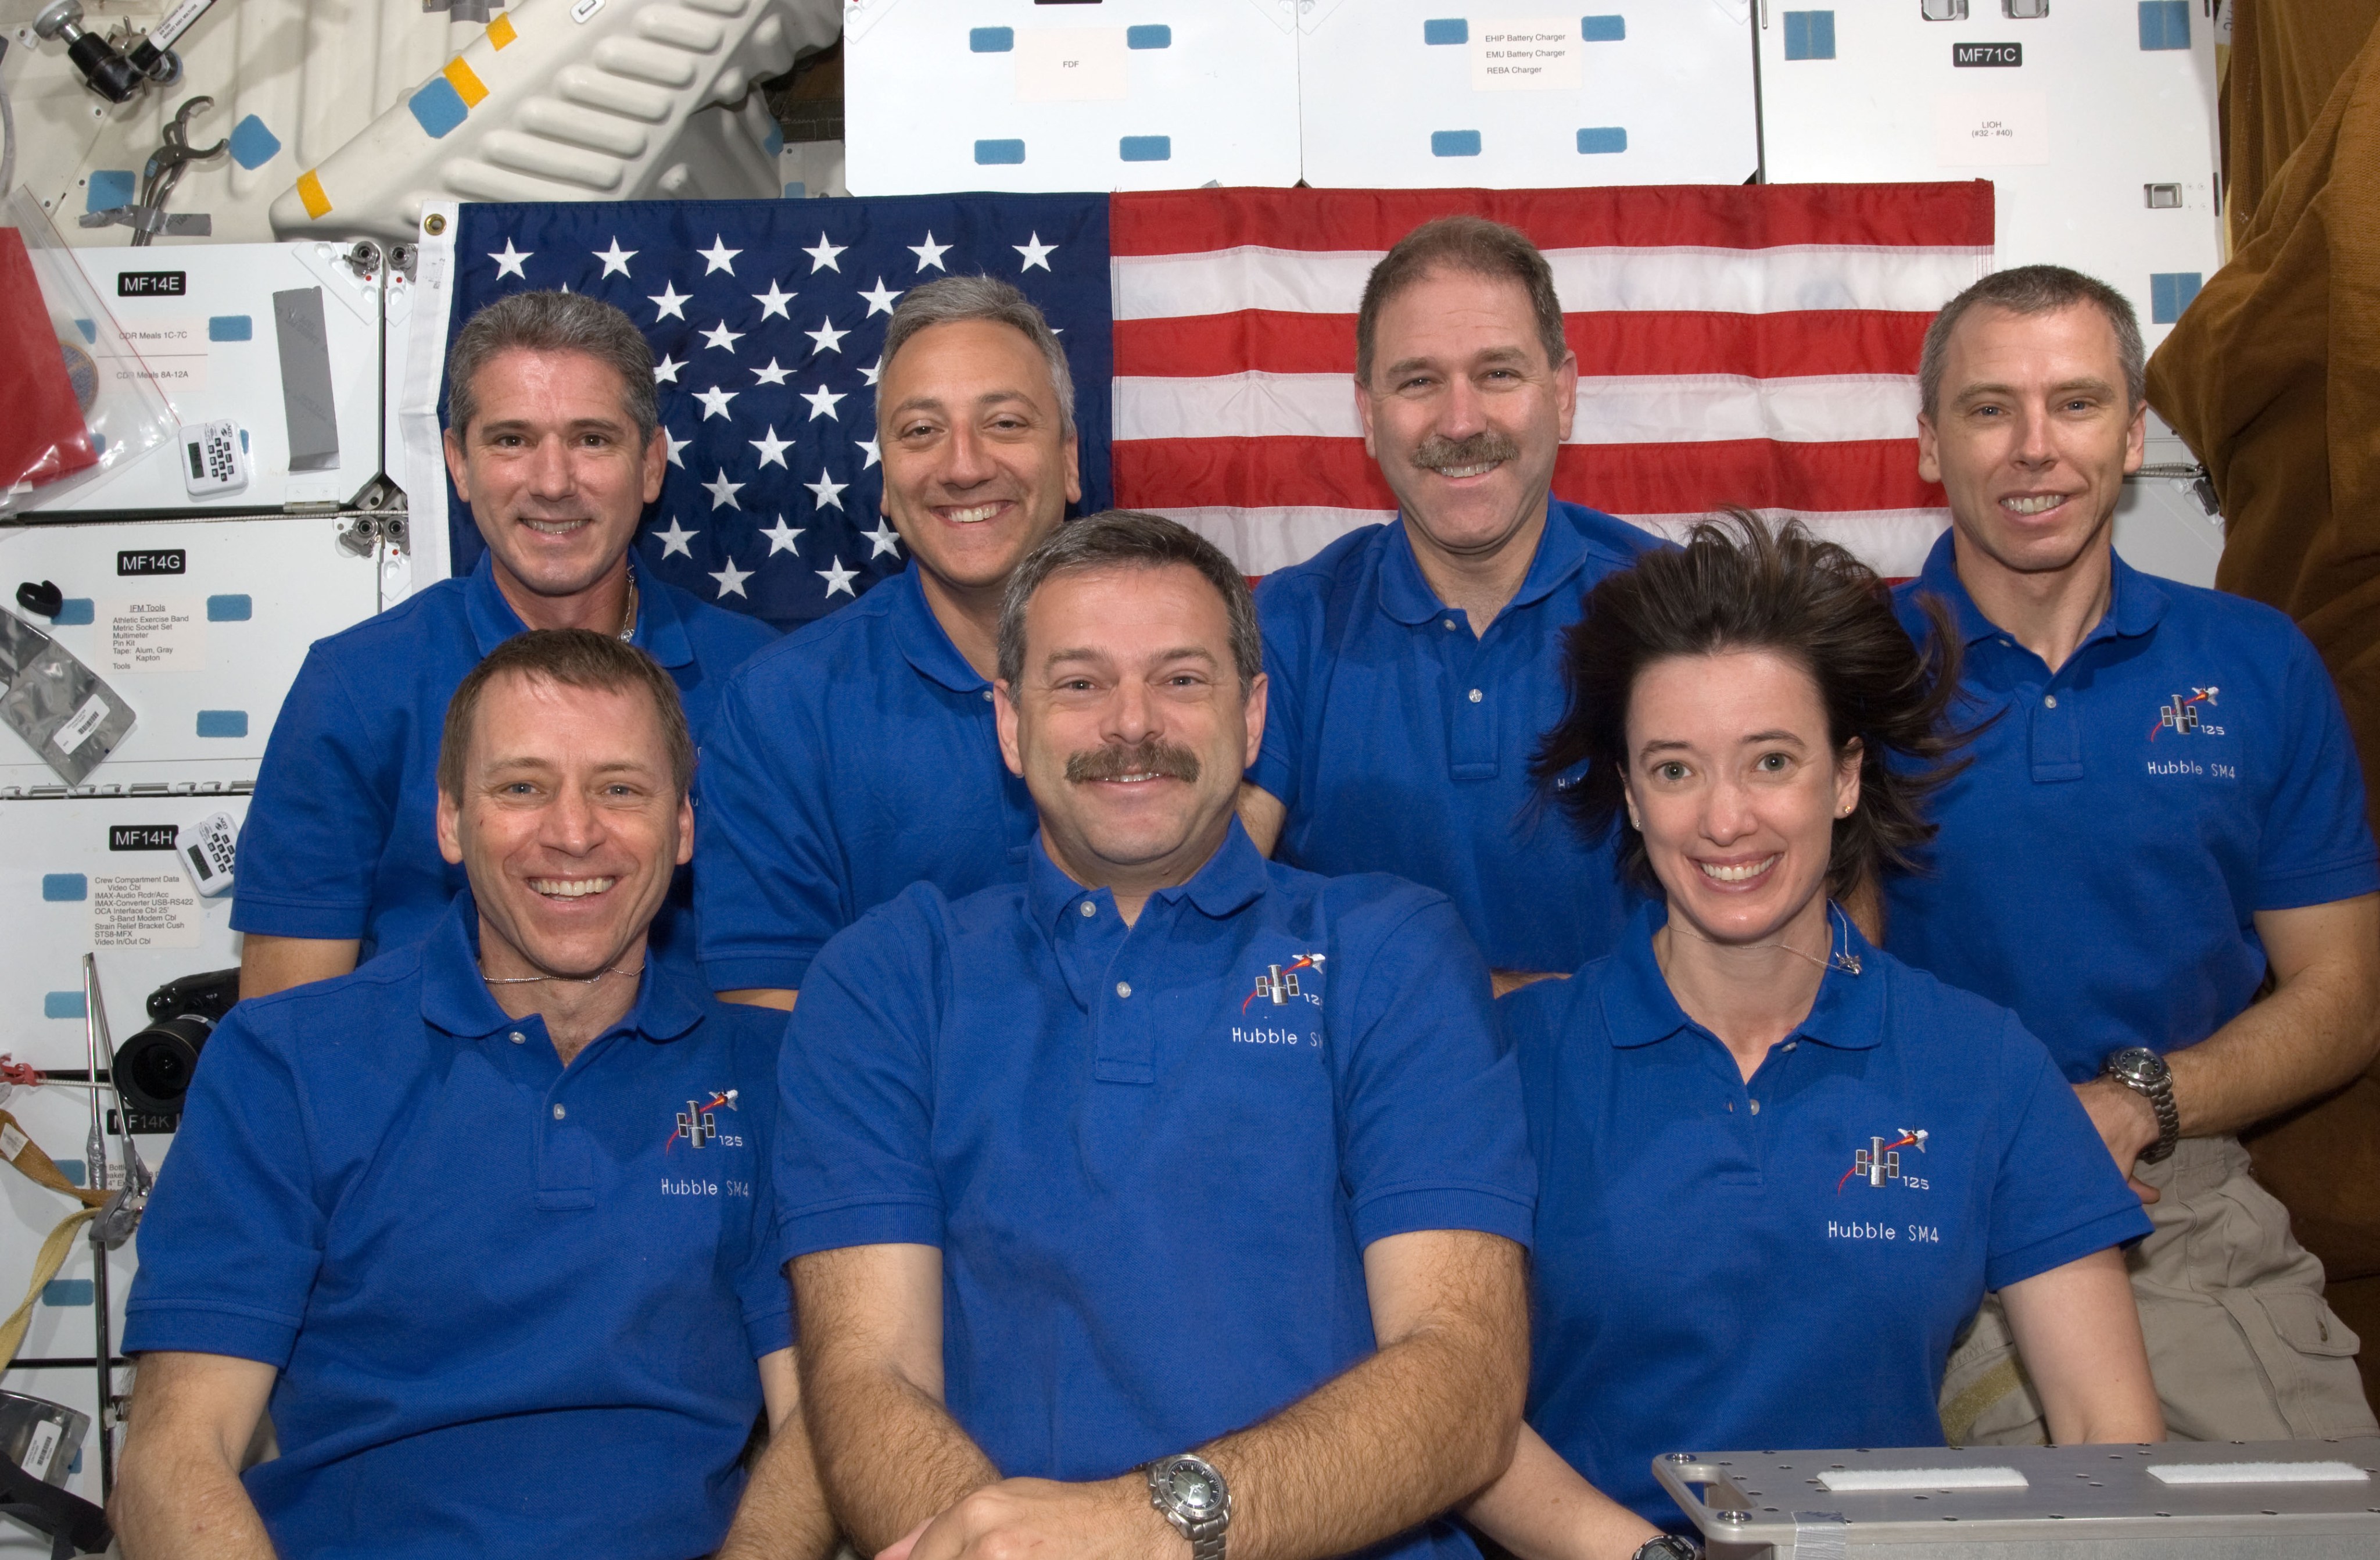 STS-125 crew poses in front of an American flag in the crew cabin of the shuttle.